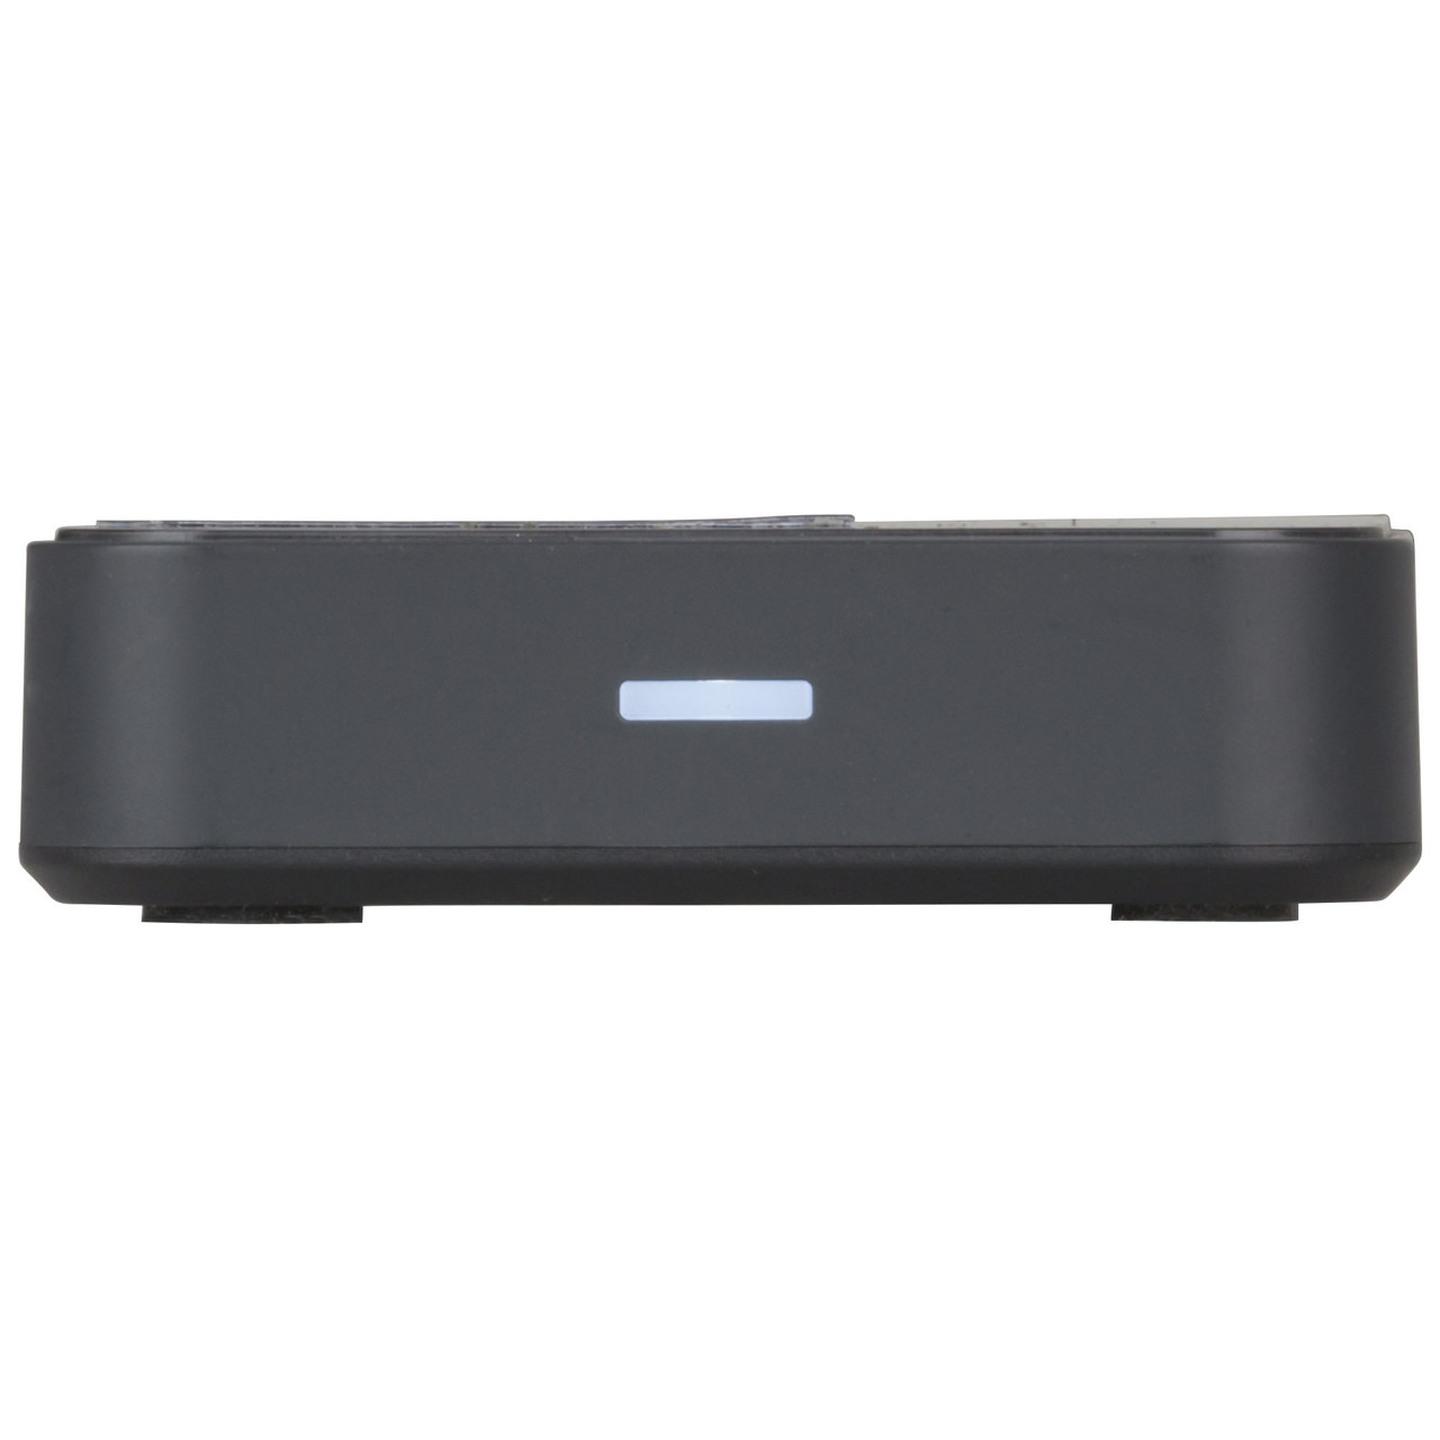 Bluetooth 4.0 receiver with NFC